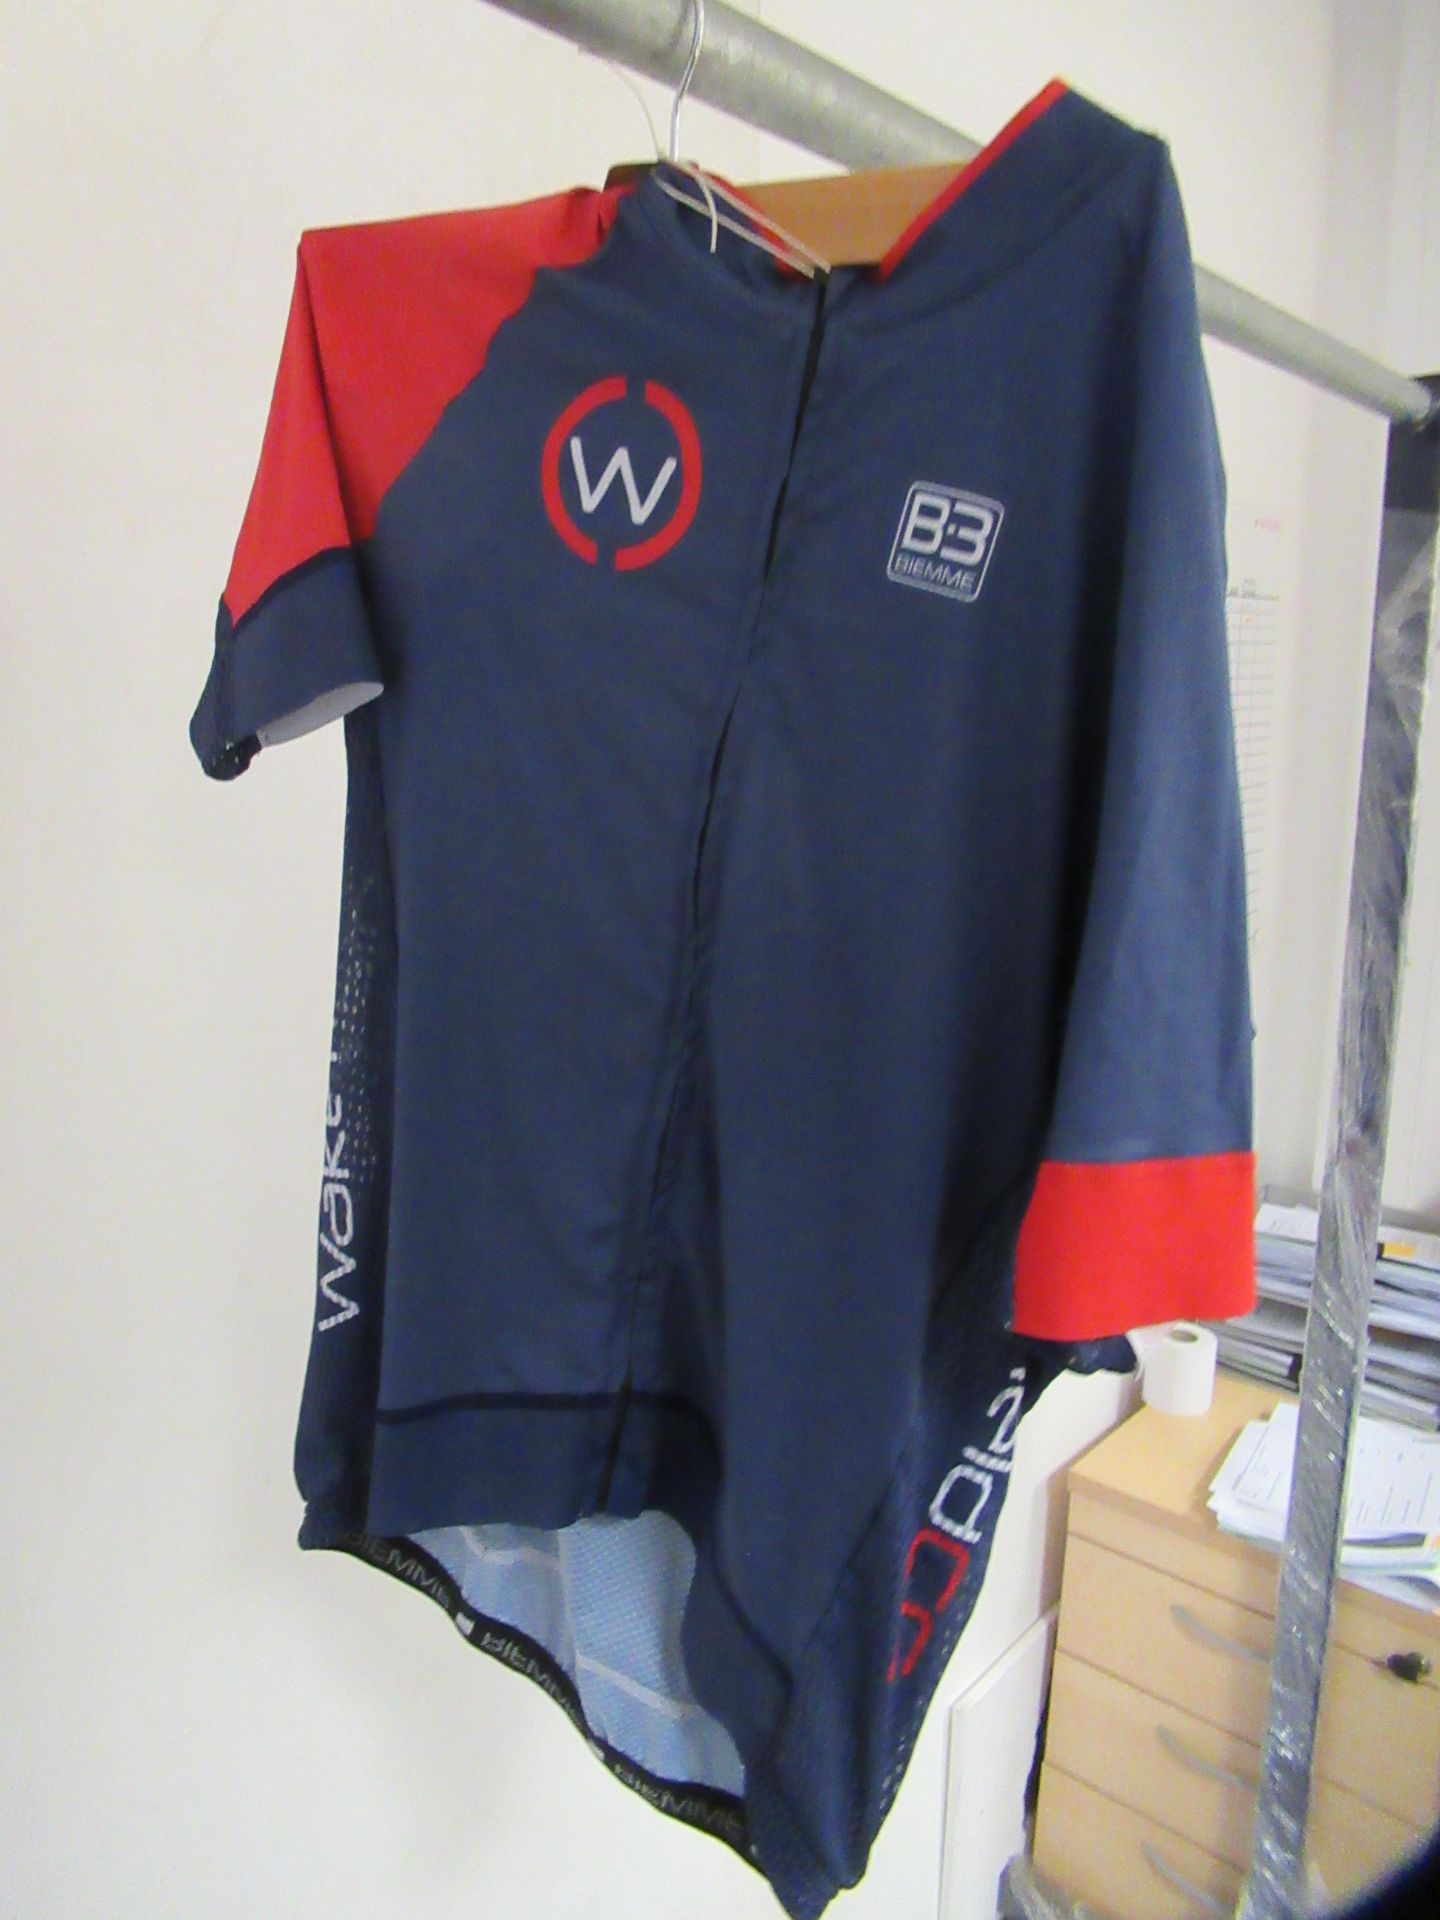 XL Male Cycling Clothes - Image 7 of 7